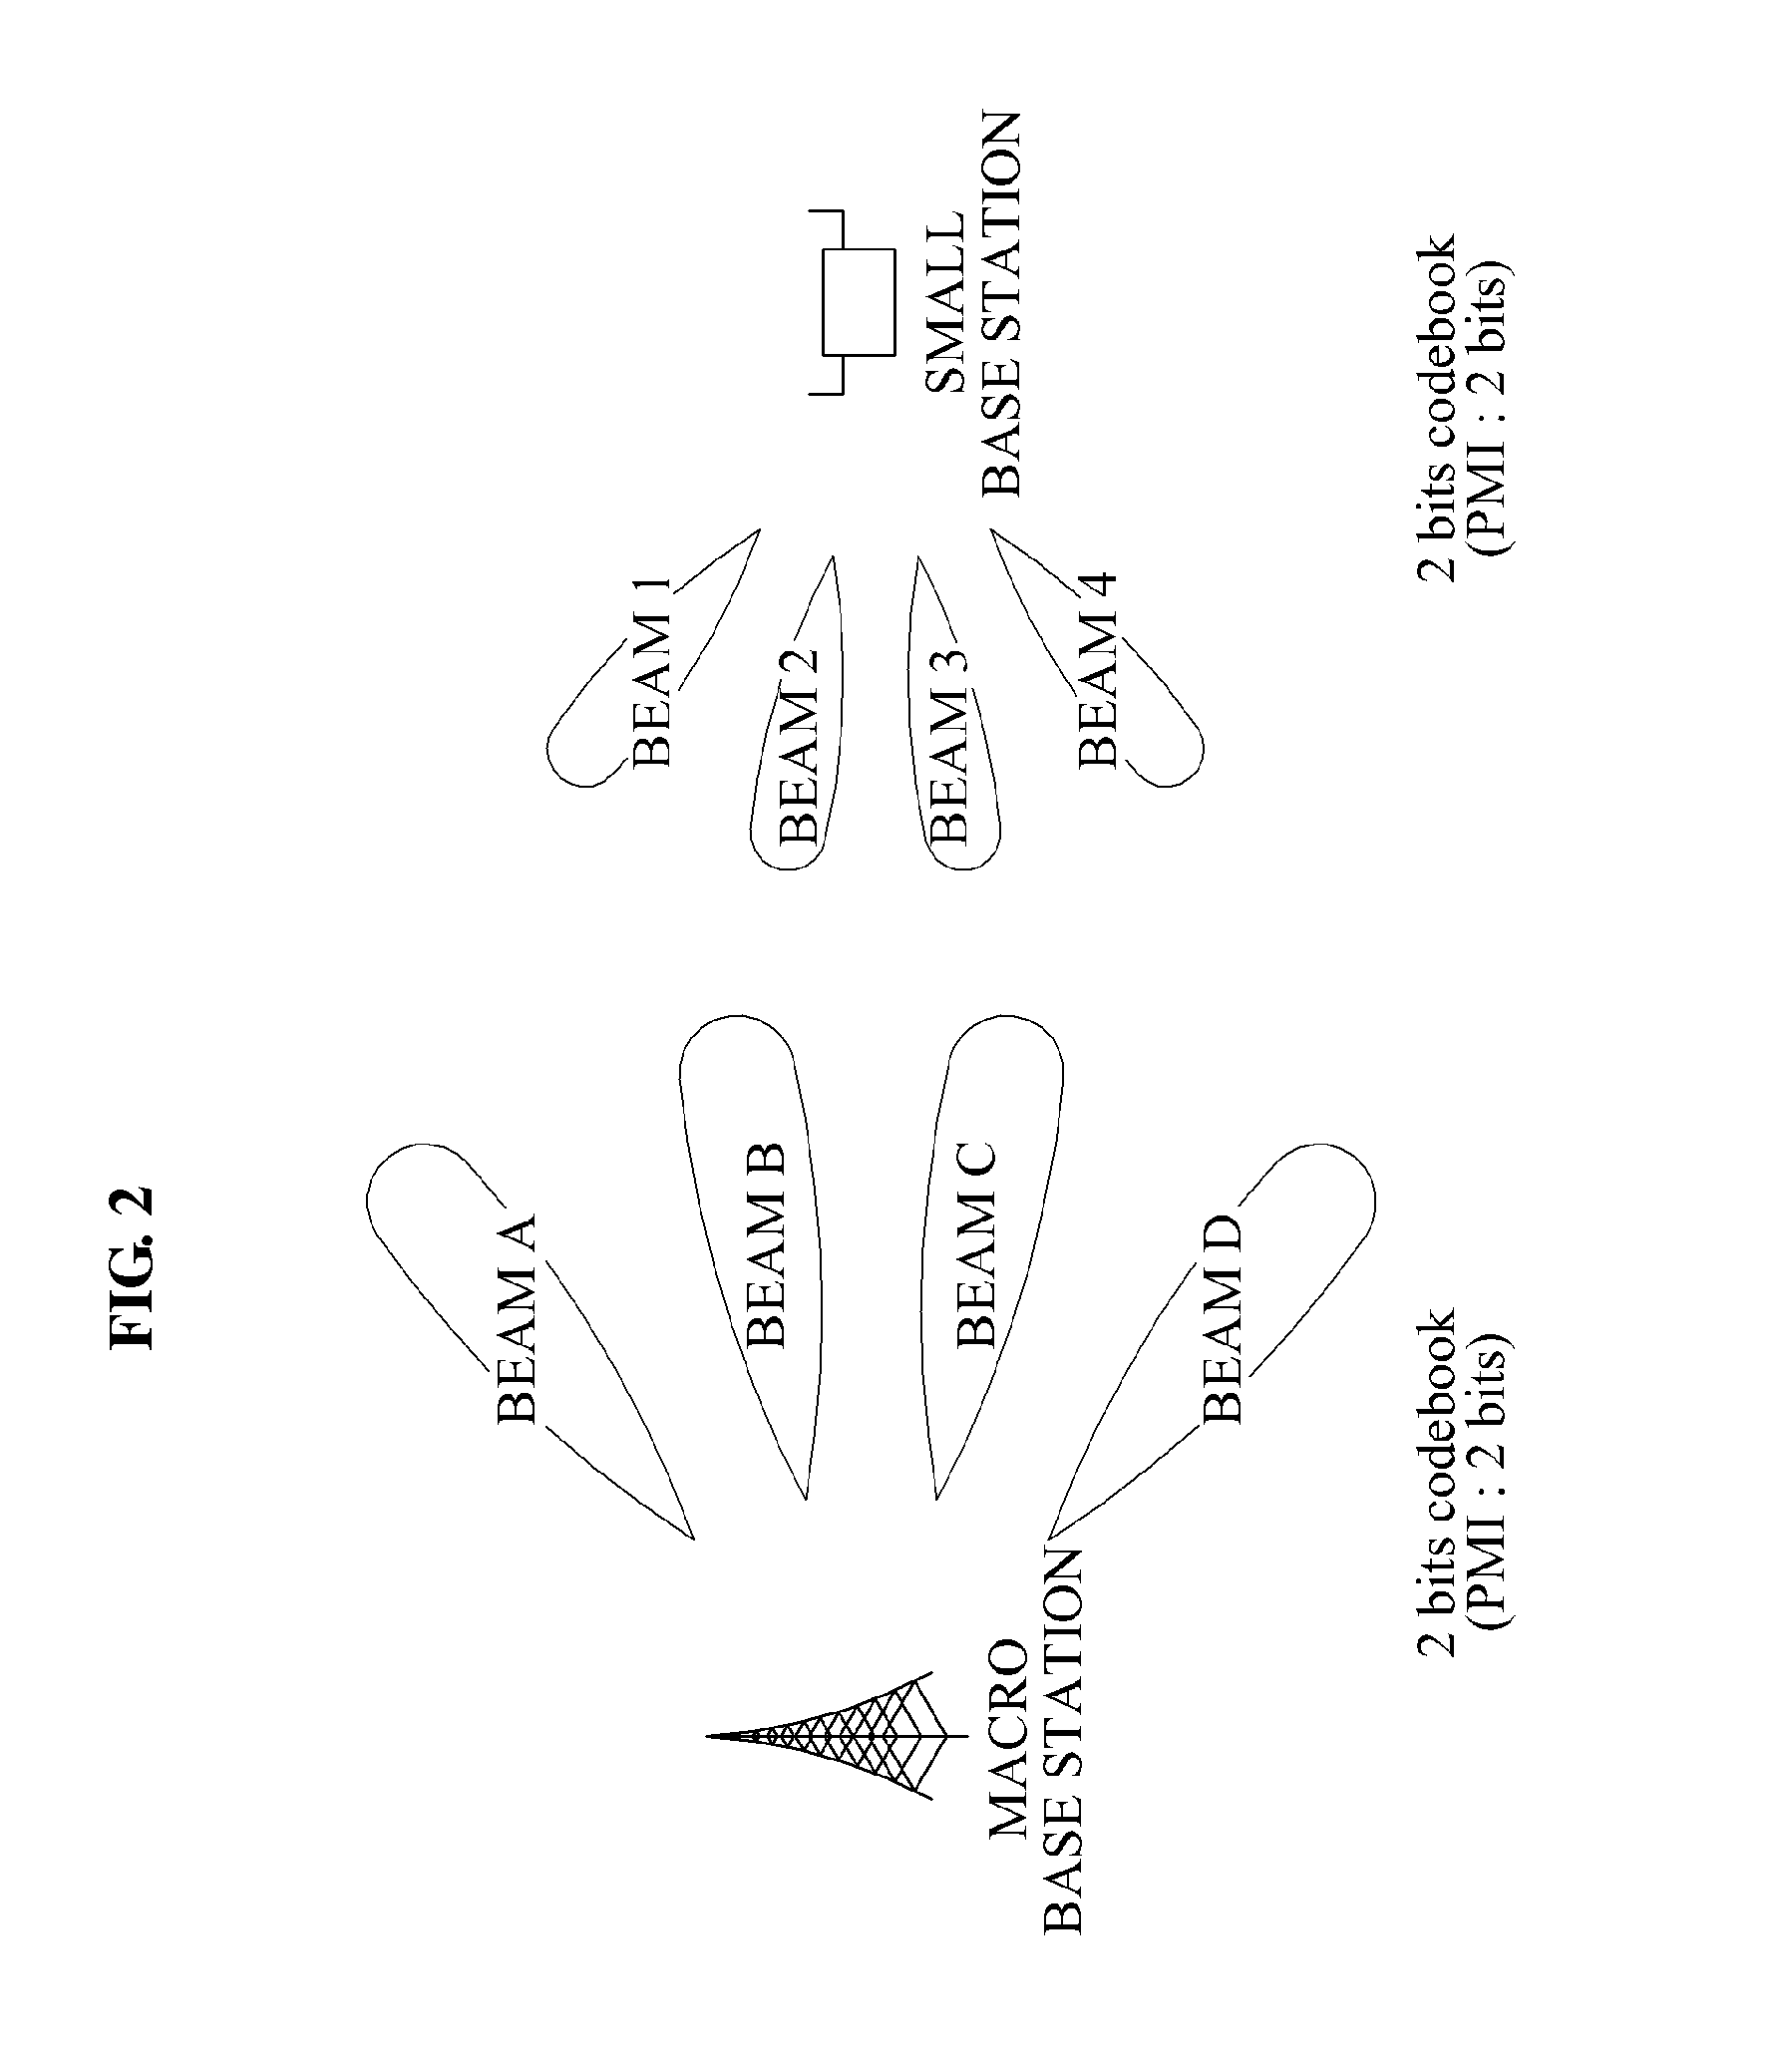 Hierarchical-cell communication system using asymmetric feedback scheme based on class of access network